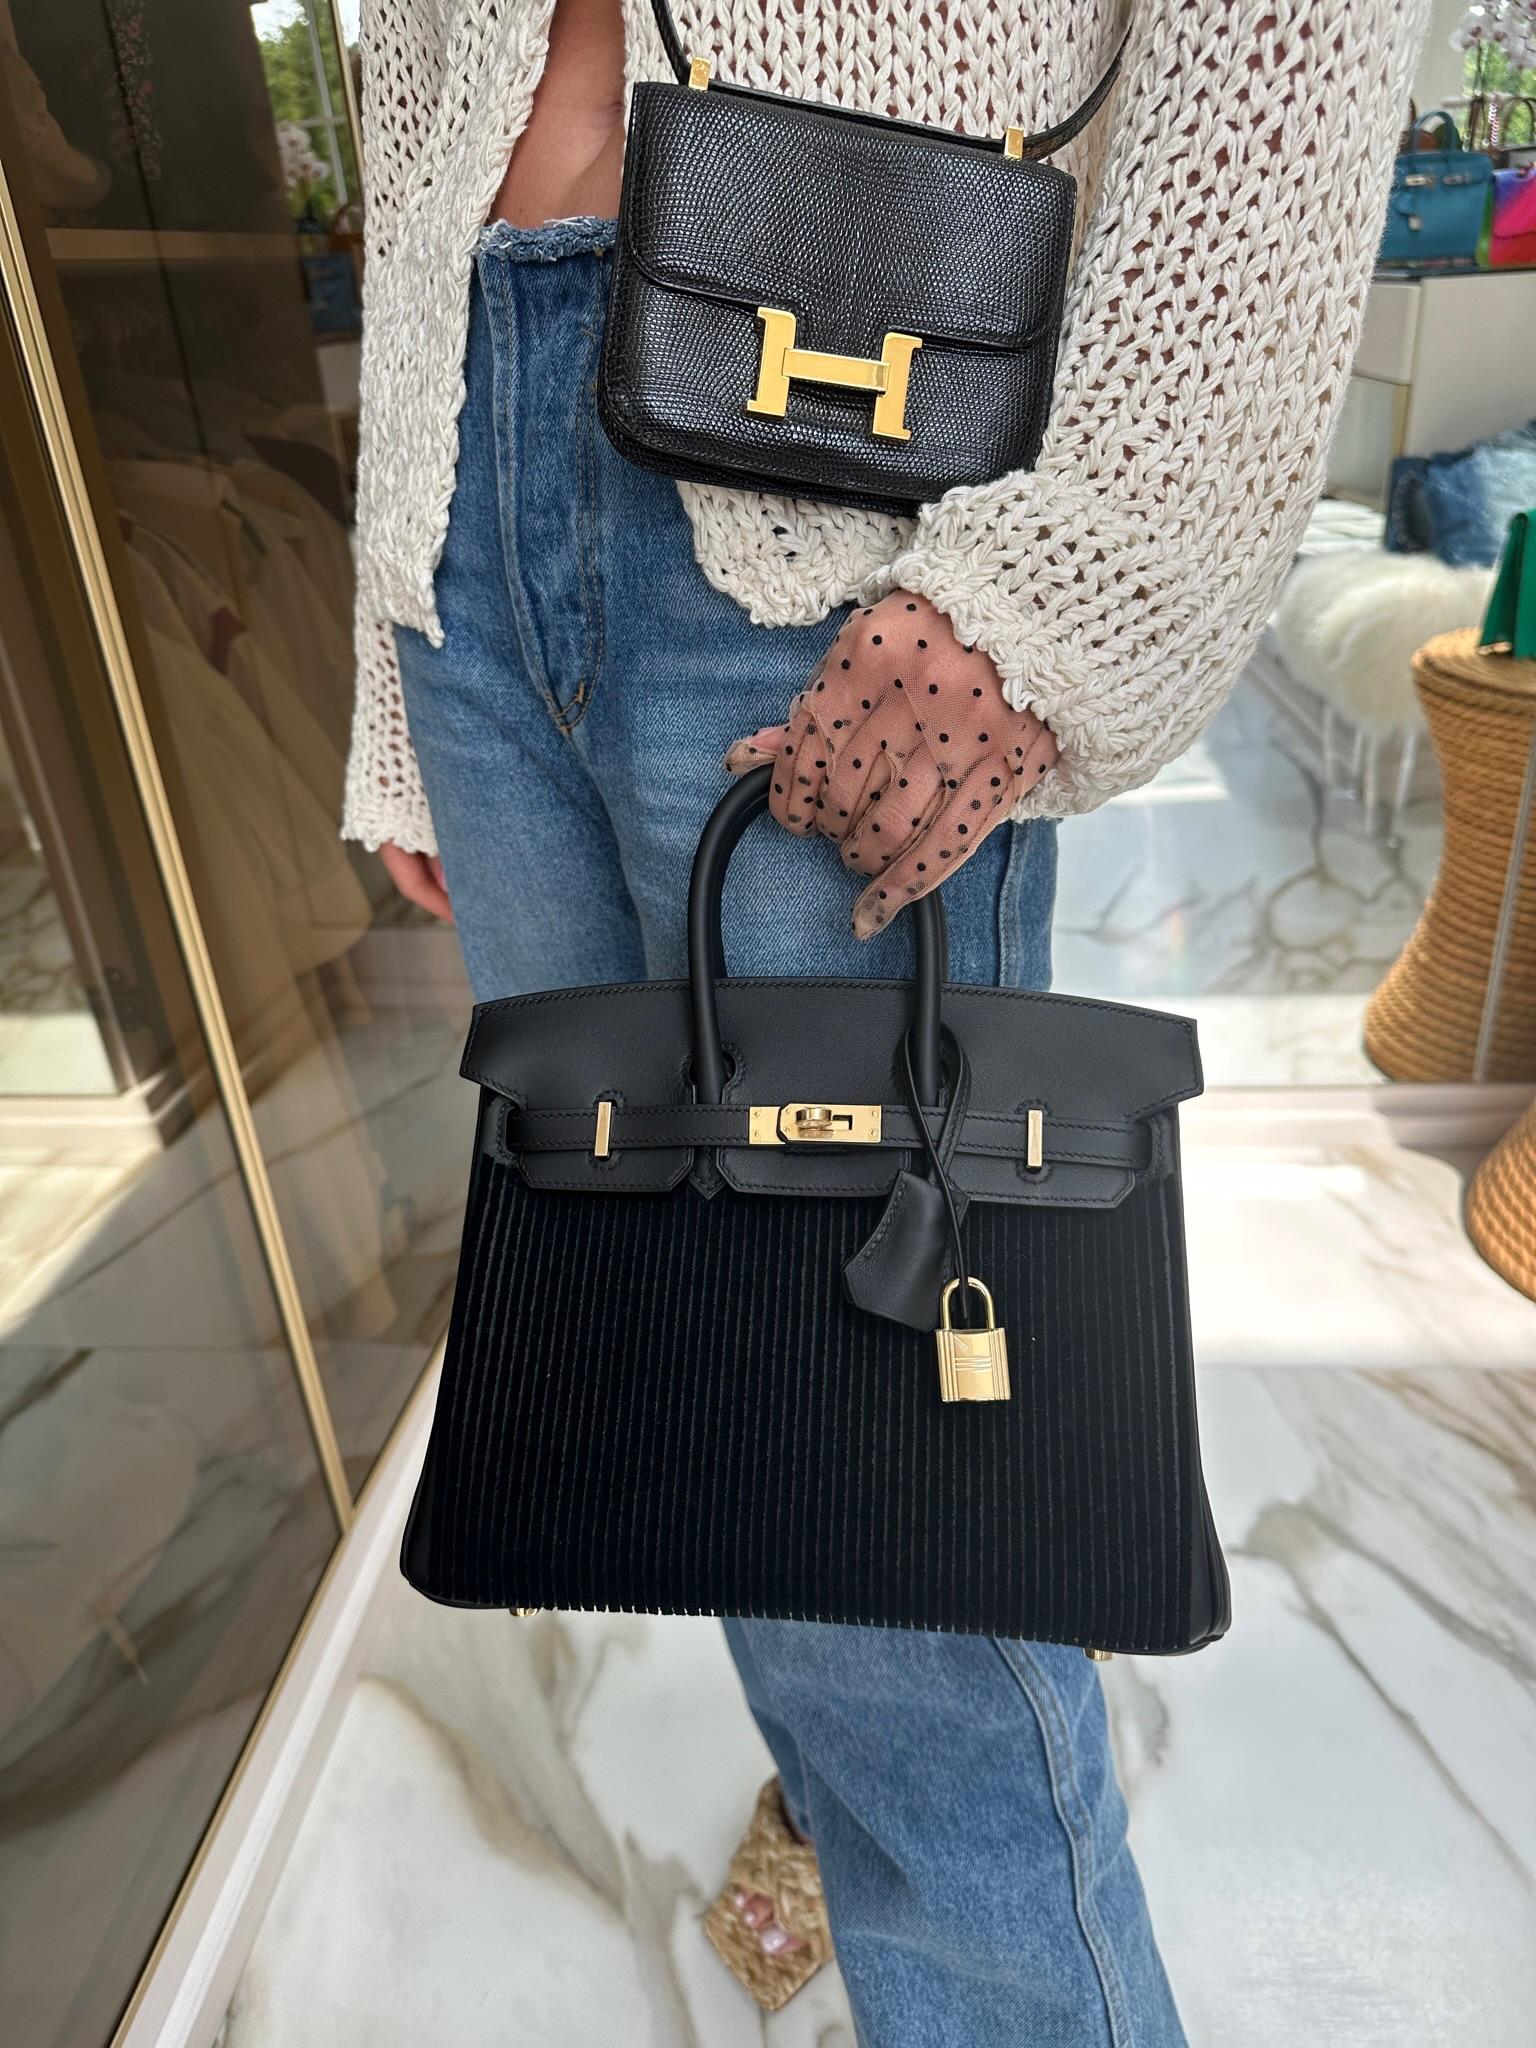 Hermès Birkin 25 Black côte à côte tuffetage and Swift Permabrass Hardware

The Hermès Birkin 25 Black Côte à Côte Tuffetage Permabrass Hardware, a highly exclusive and luxurious handbag from the distinguished JaneFinds collection, is a true